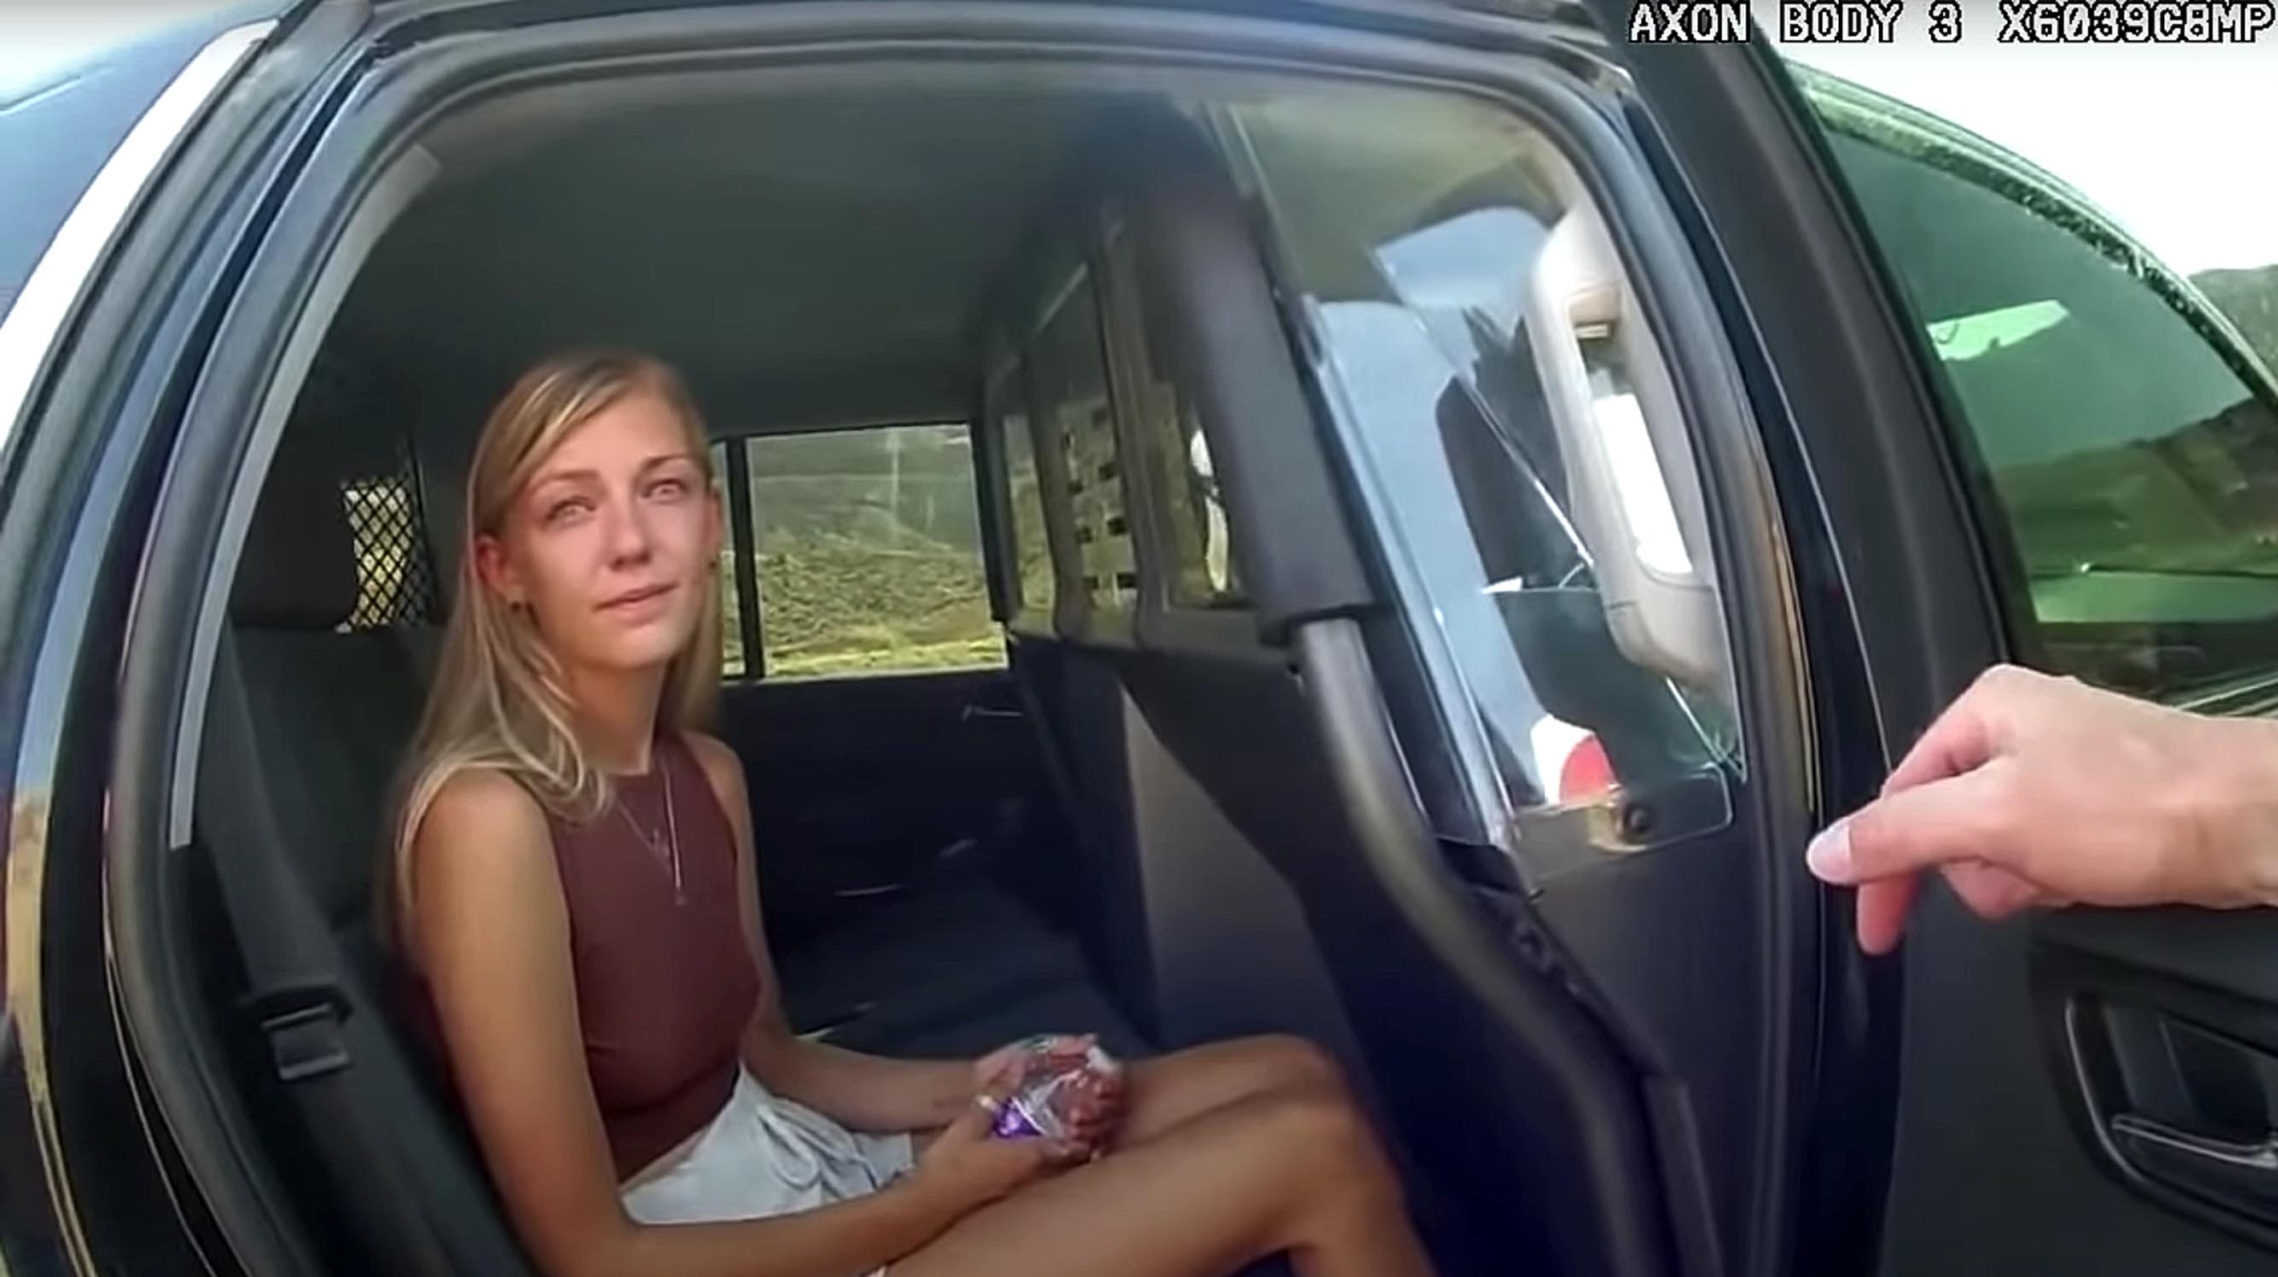 Gabby Petito is pictured in a car, her family just filed a lawsuit against moab police...